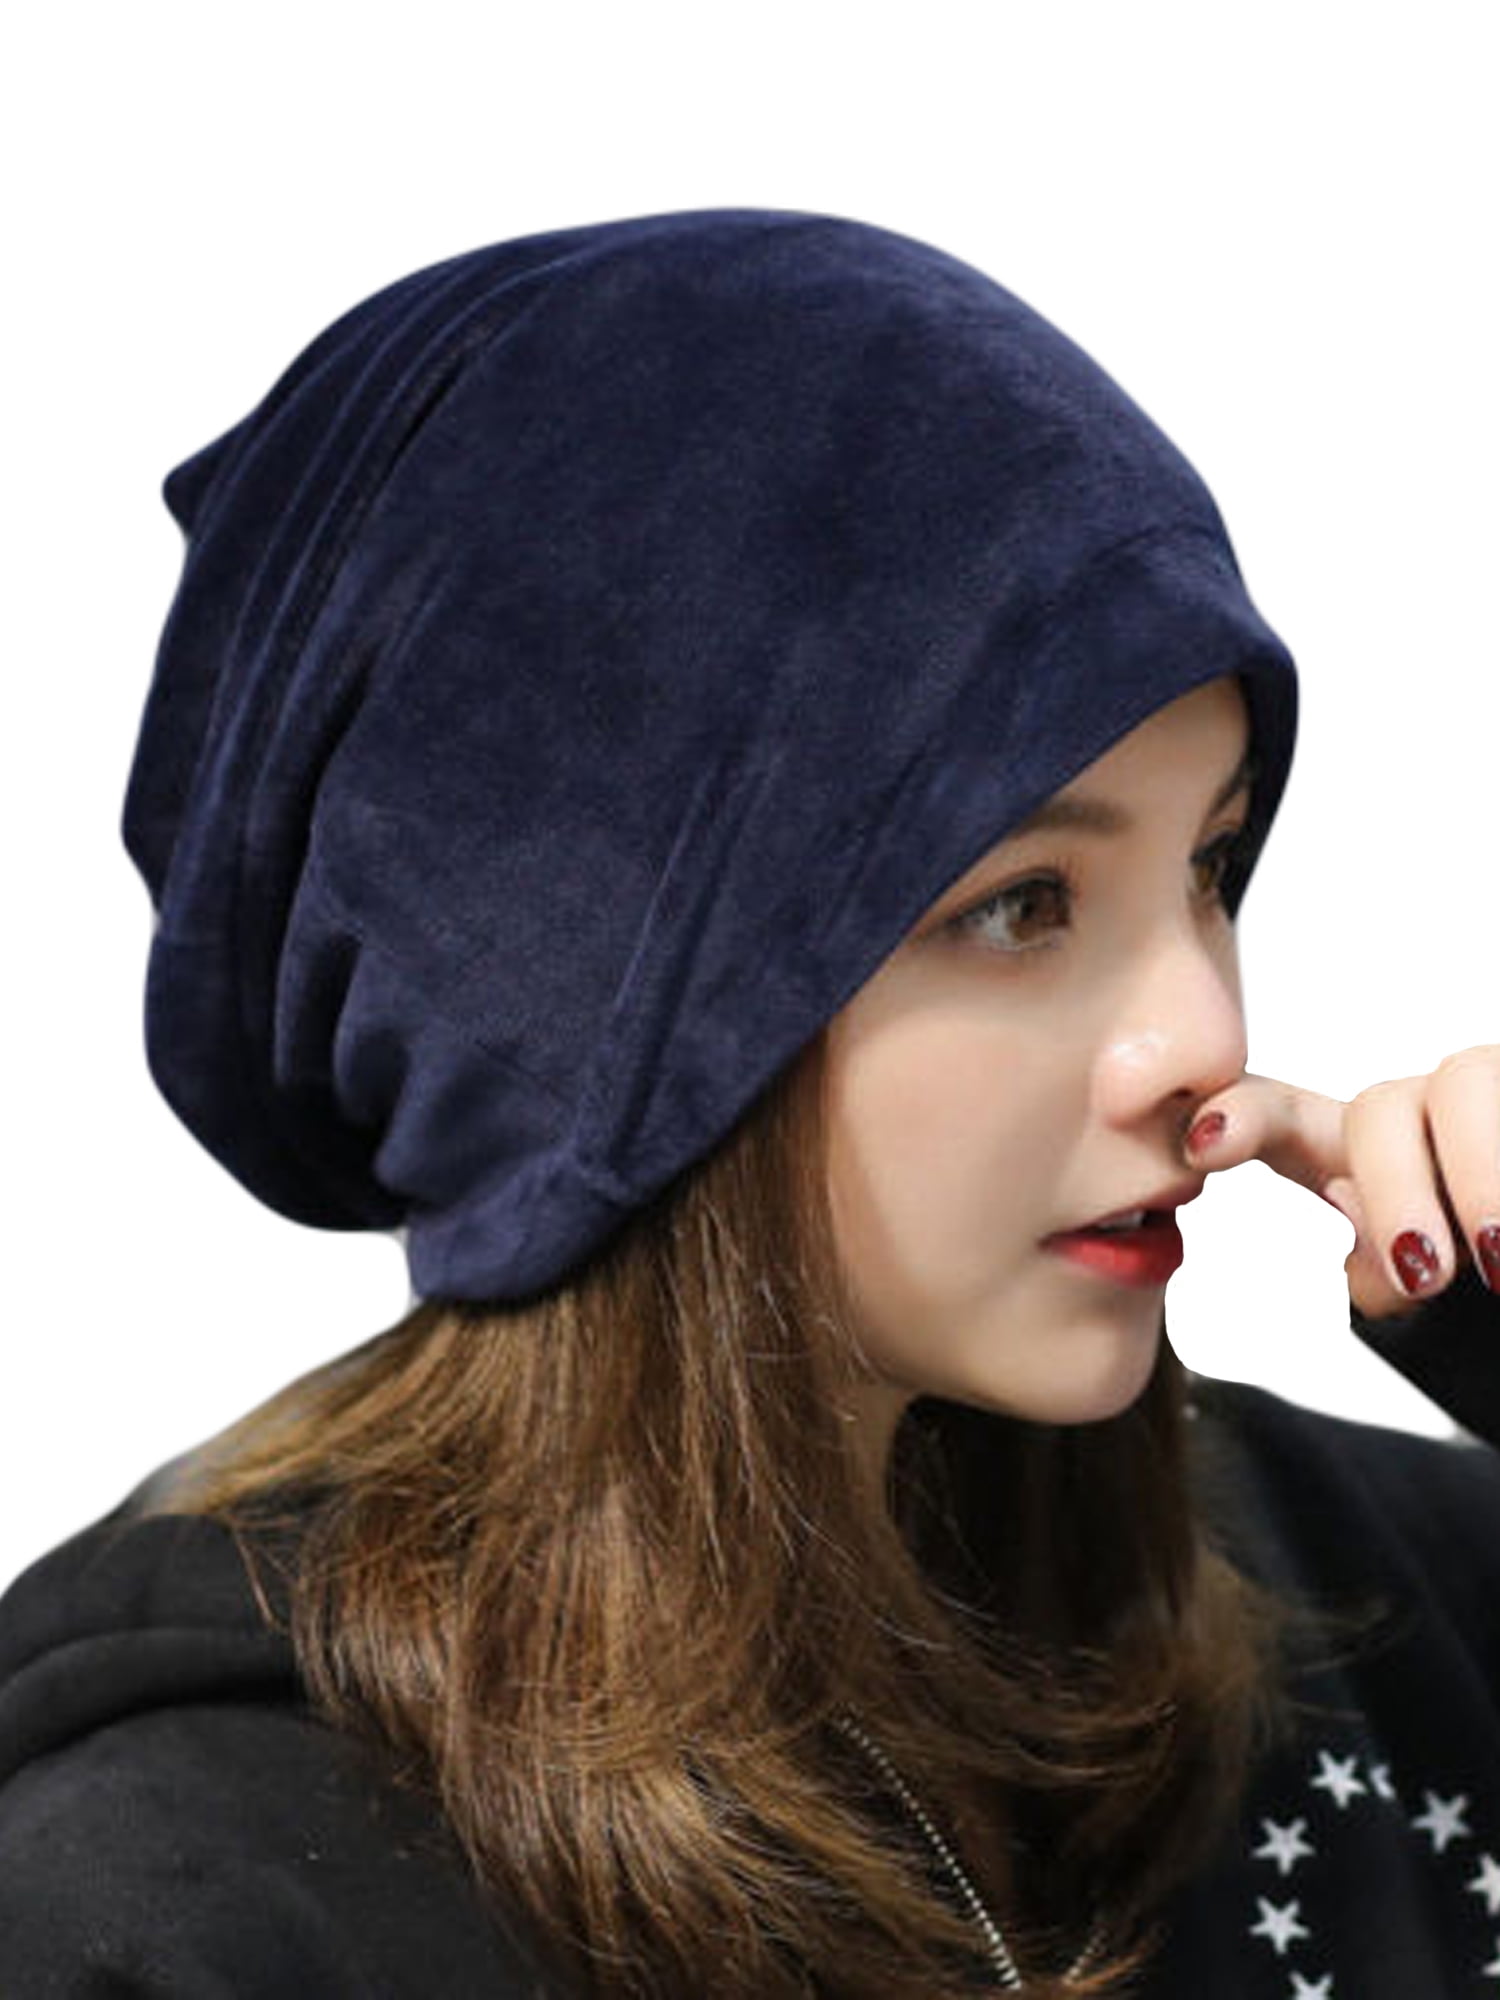 Headscarf Game On Word Hip-Hop Knitted Hat for Mens Womens Fashion Beanie Cap